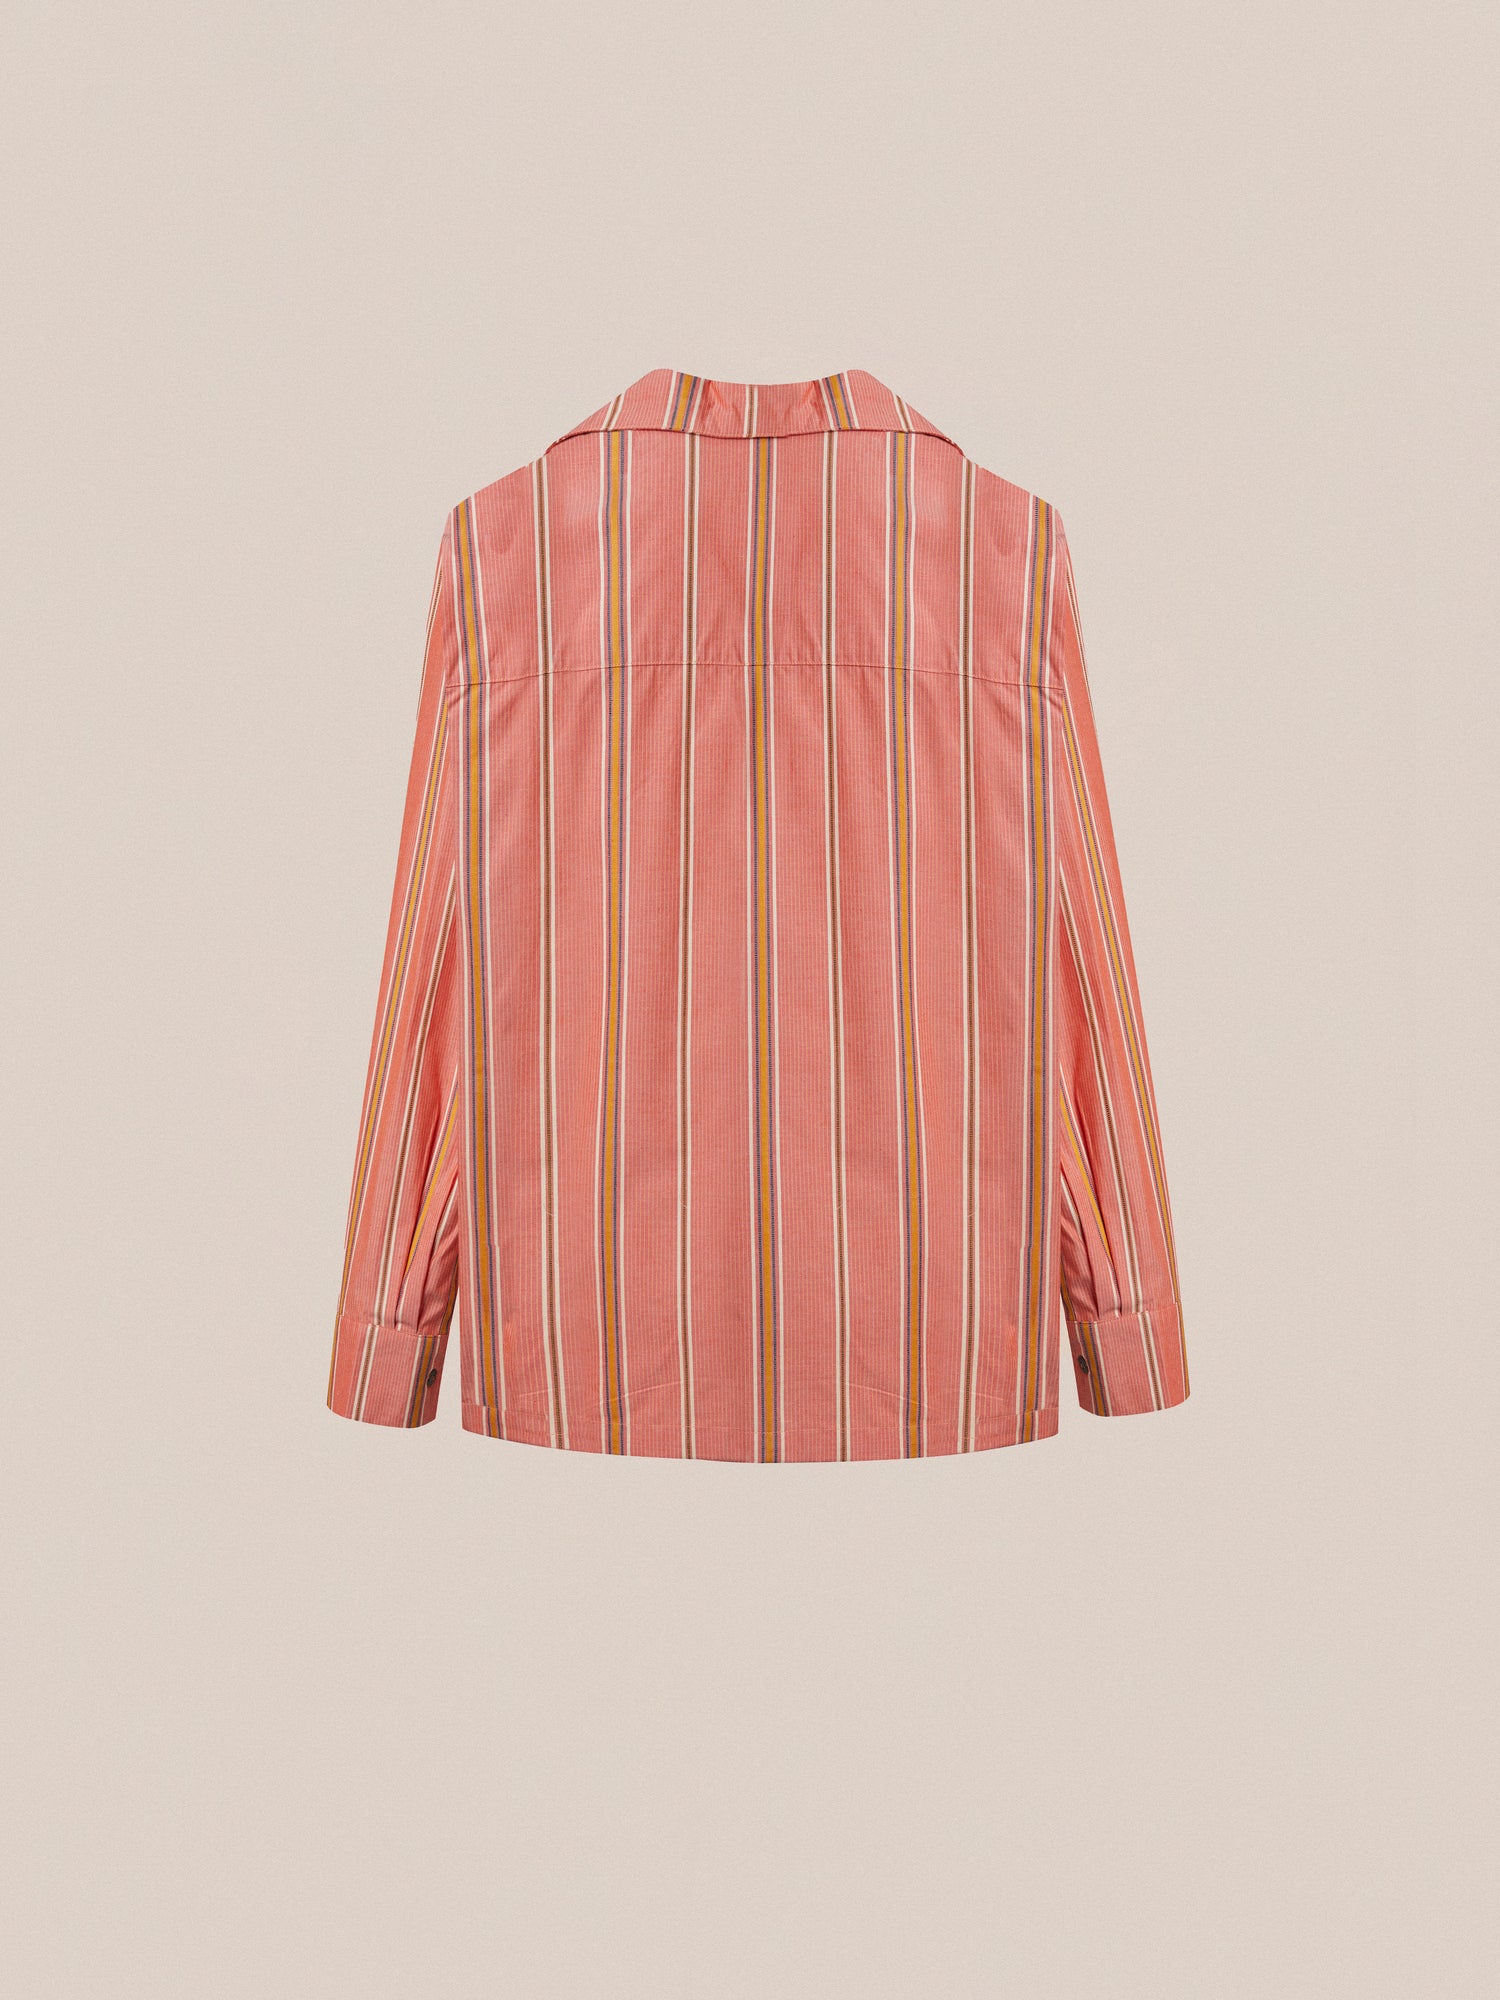 The back of a shirt with a pink and orange Found Stripe Citrus LS Camp Shirt.